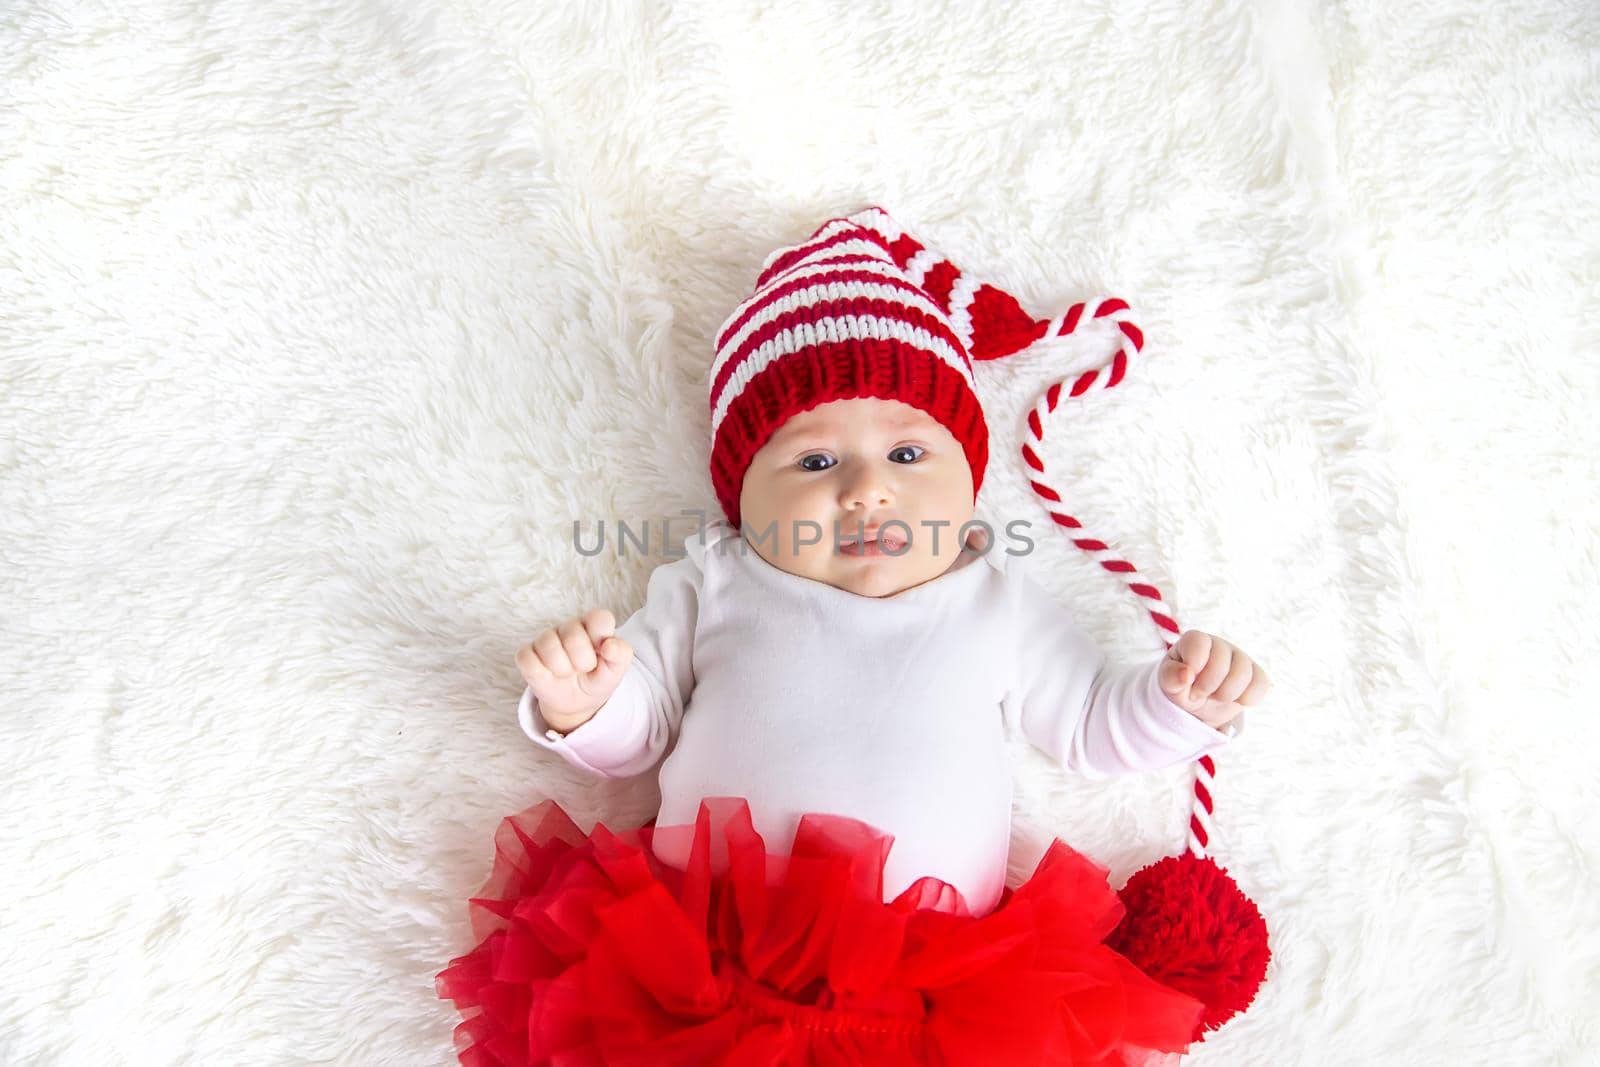 Baby dressed as Santa Claus. Christmas. Selective focus. People.